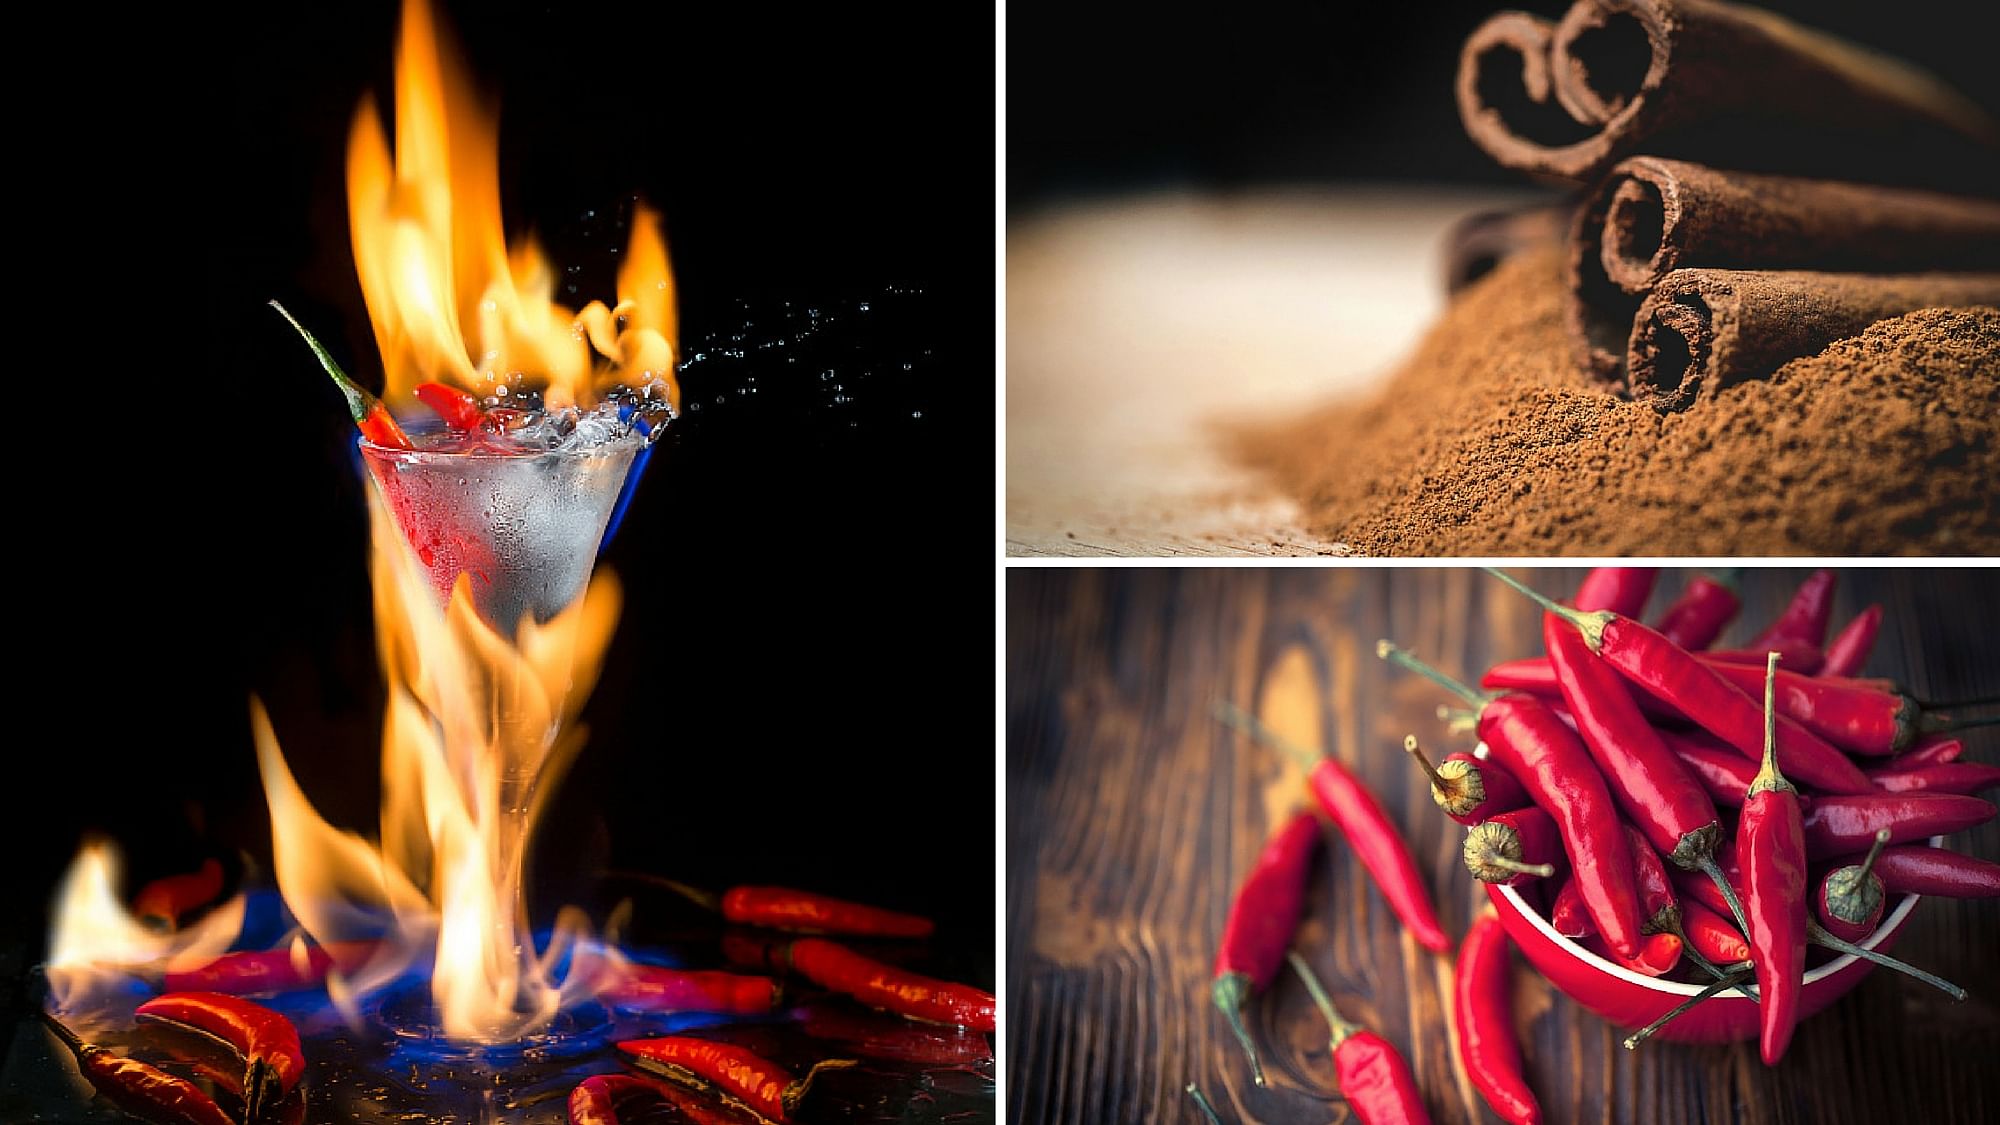 Add some spice to your drink. (Photo: iStockphoto)